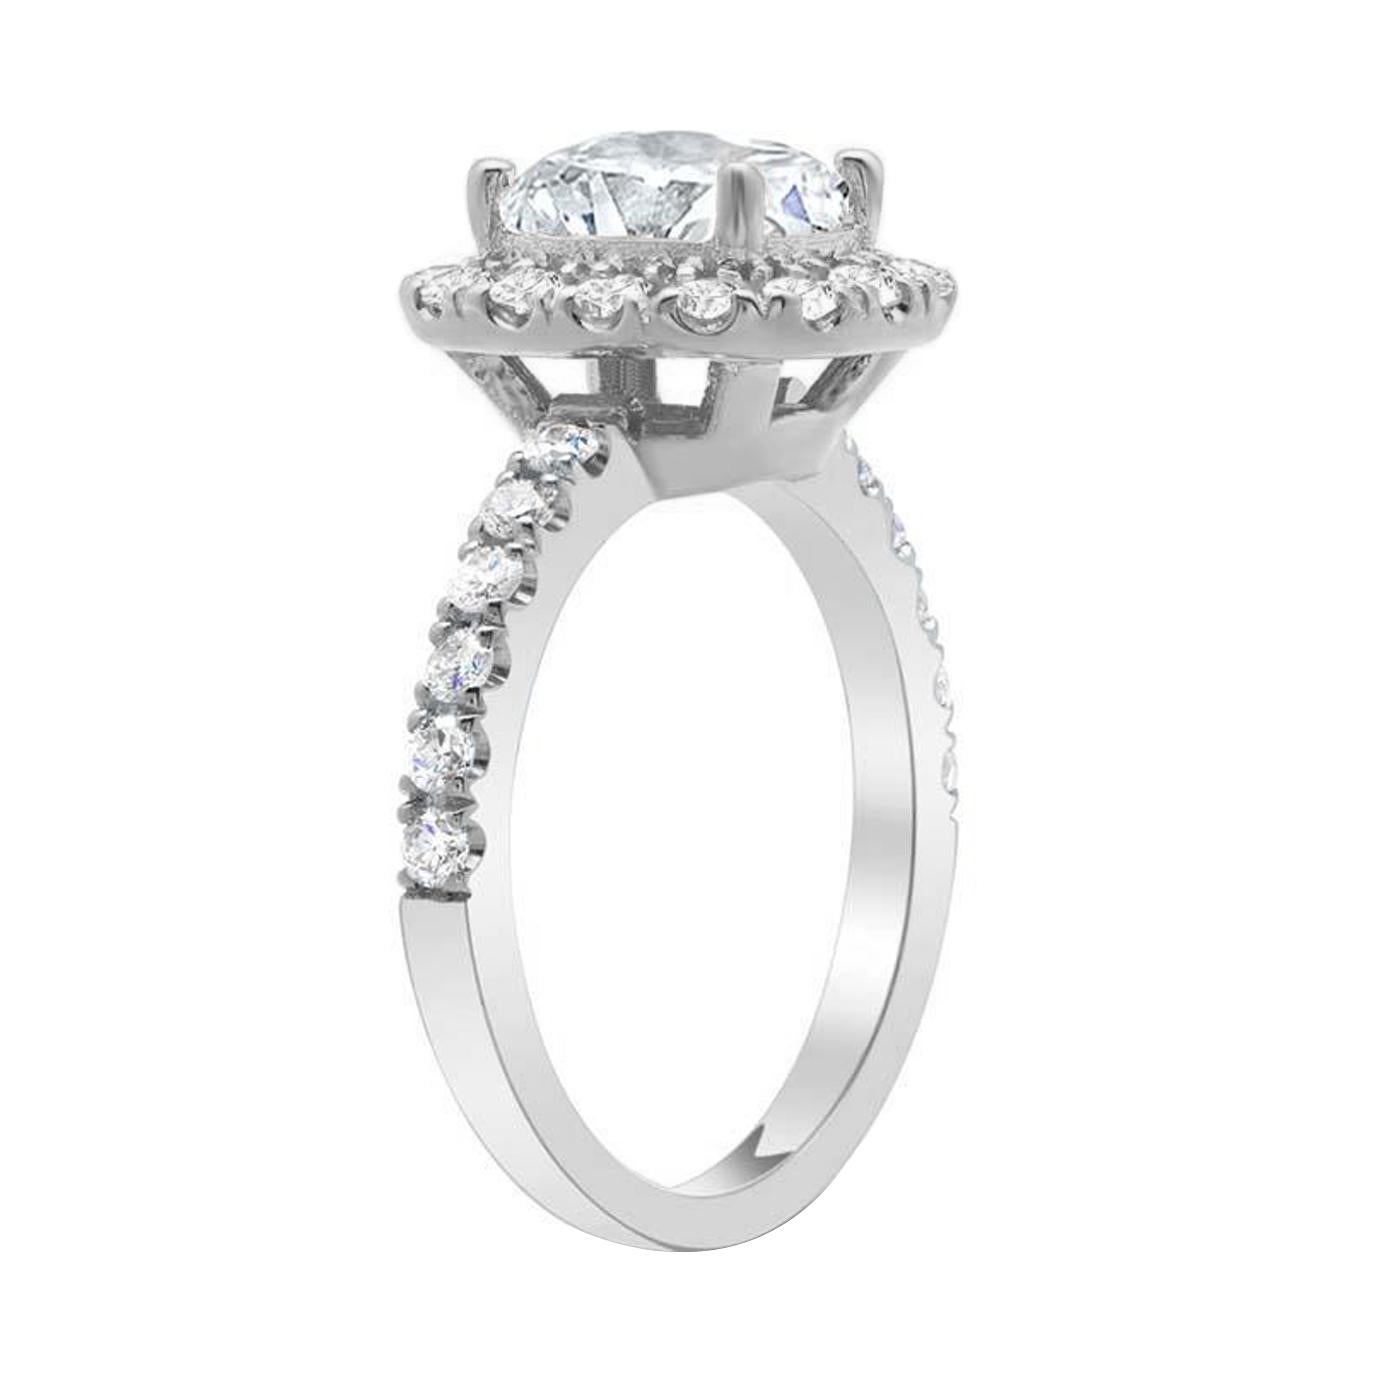 Modernist 2.70ct GIA Natural Cushion Cut Diamond Platinum Wedding Ring with Pave Diamonds For Sale